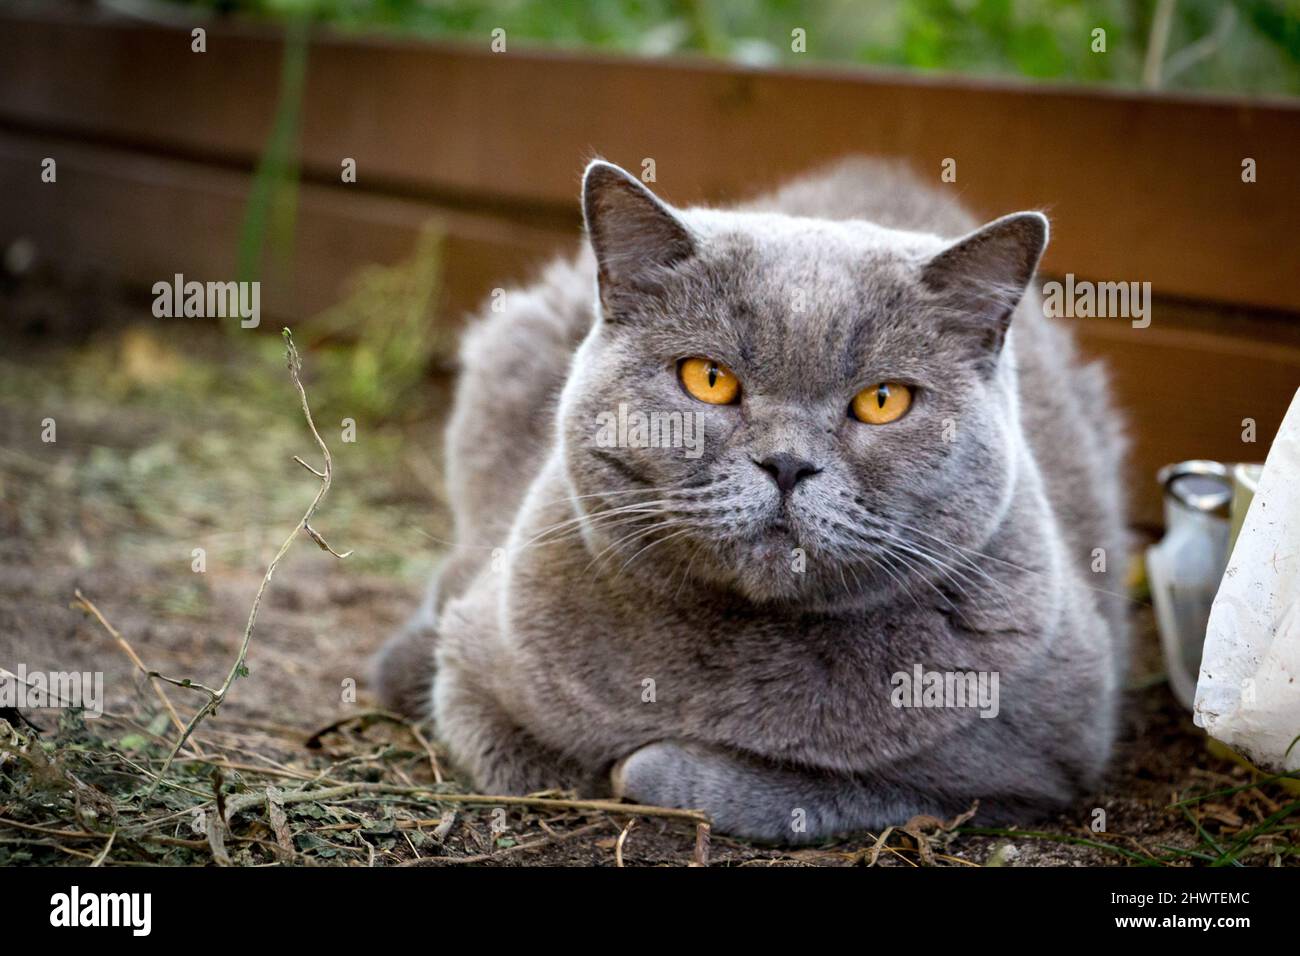 A cute British shorthair cat lies on the ground and looks at the camera. Stock Photo